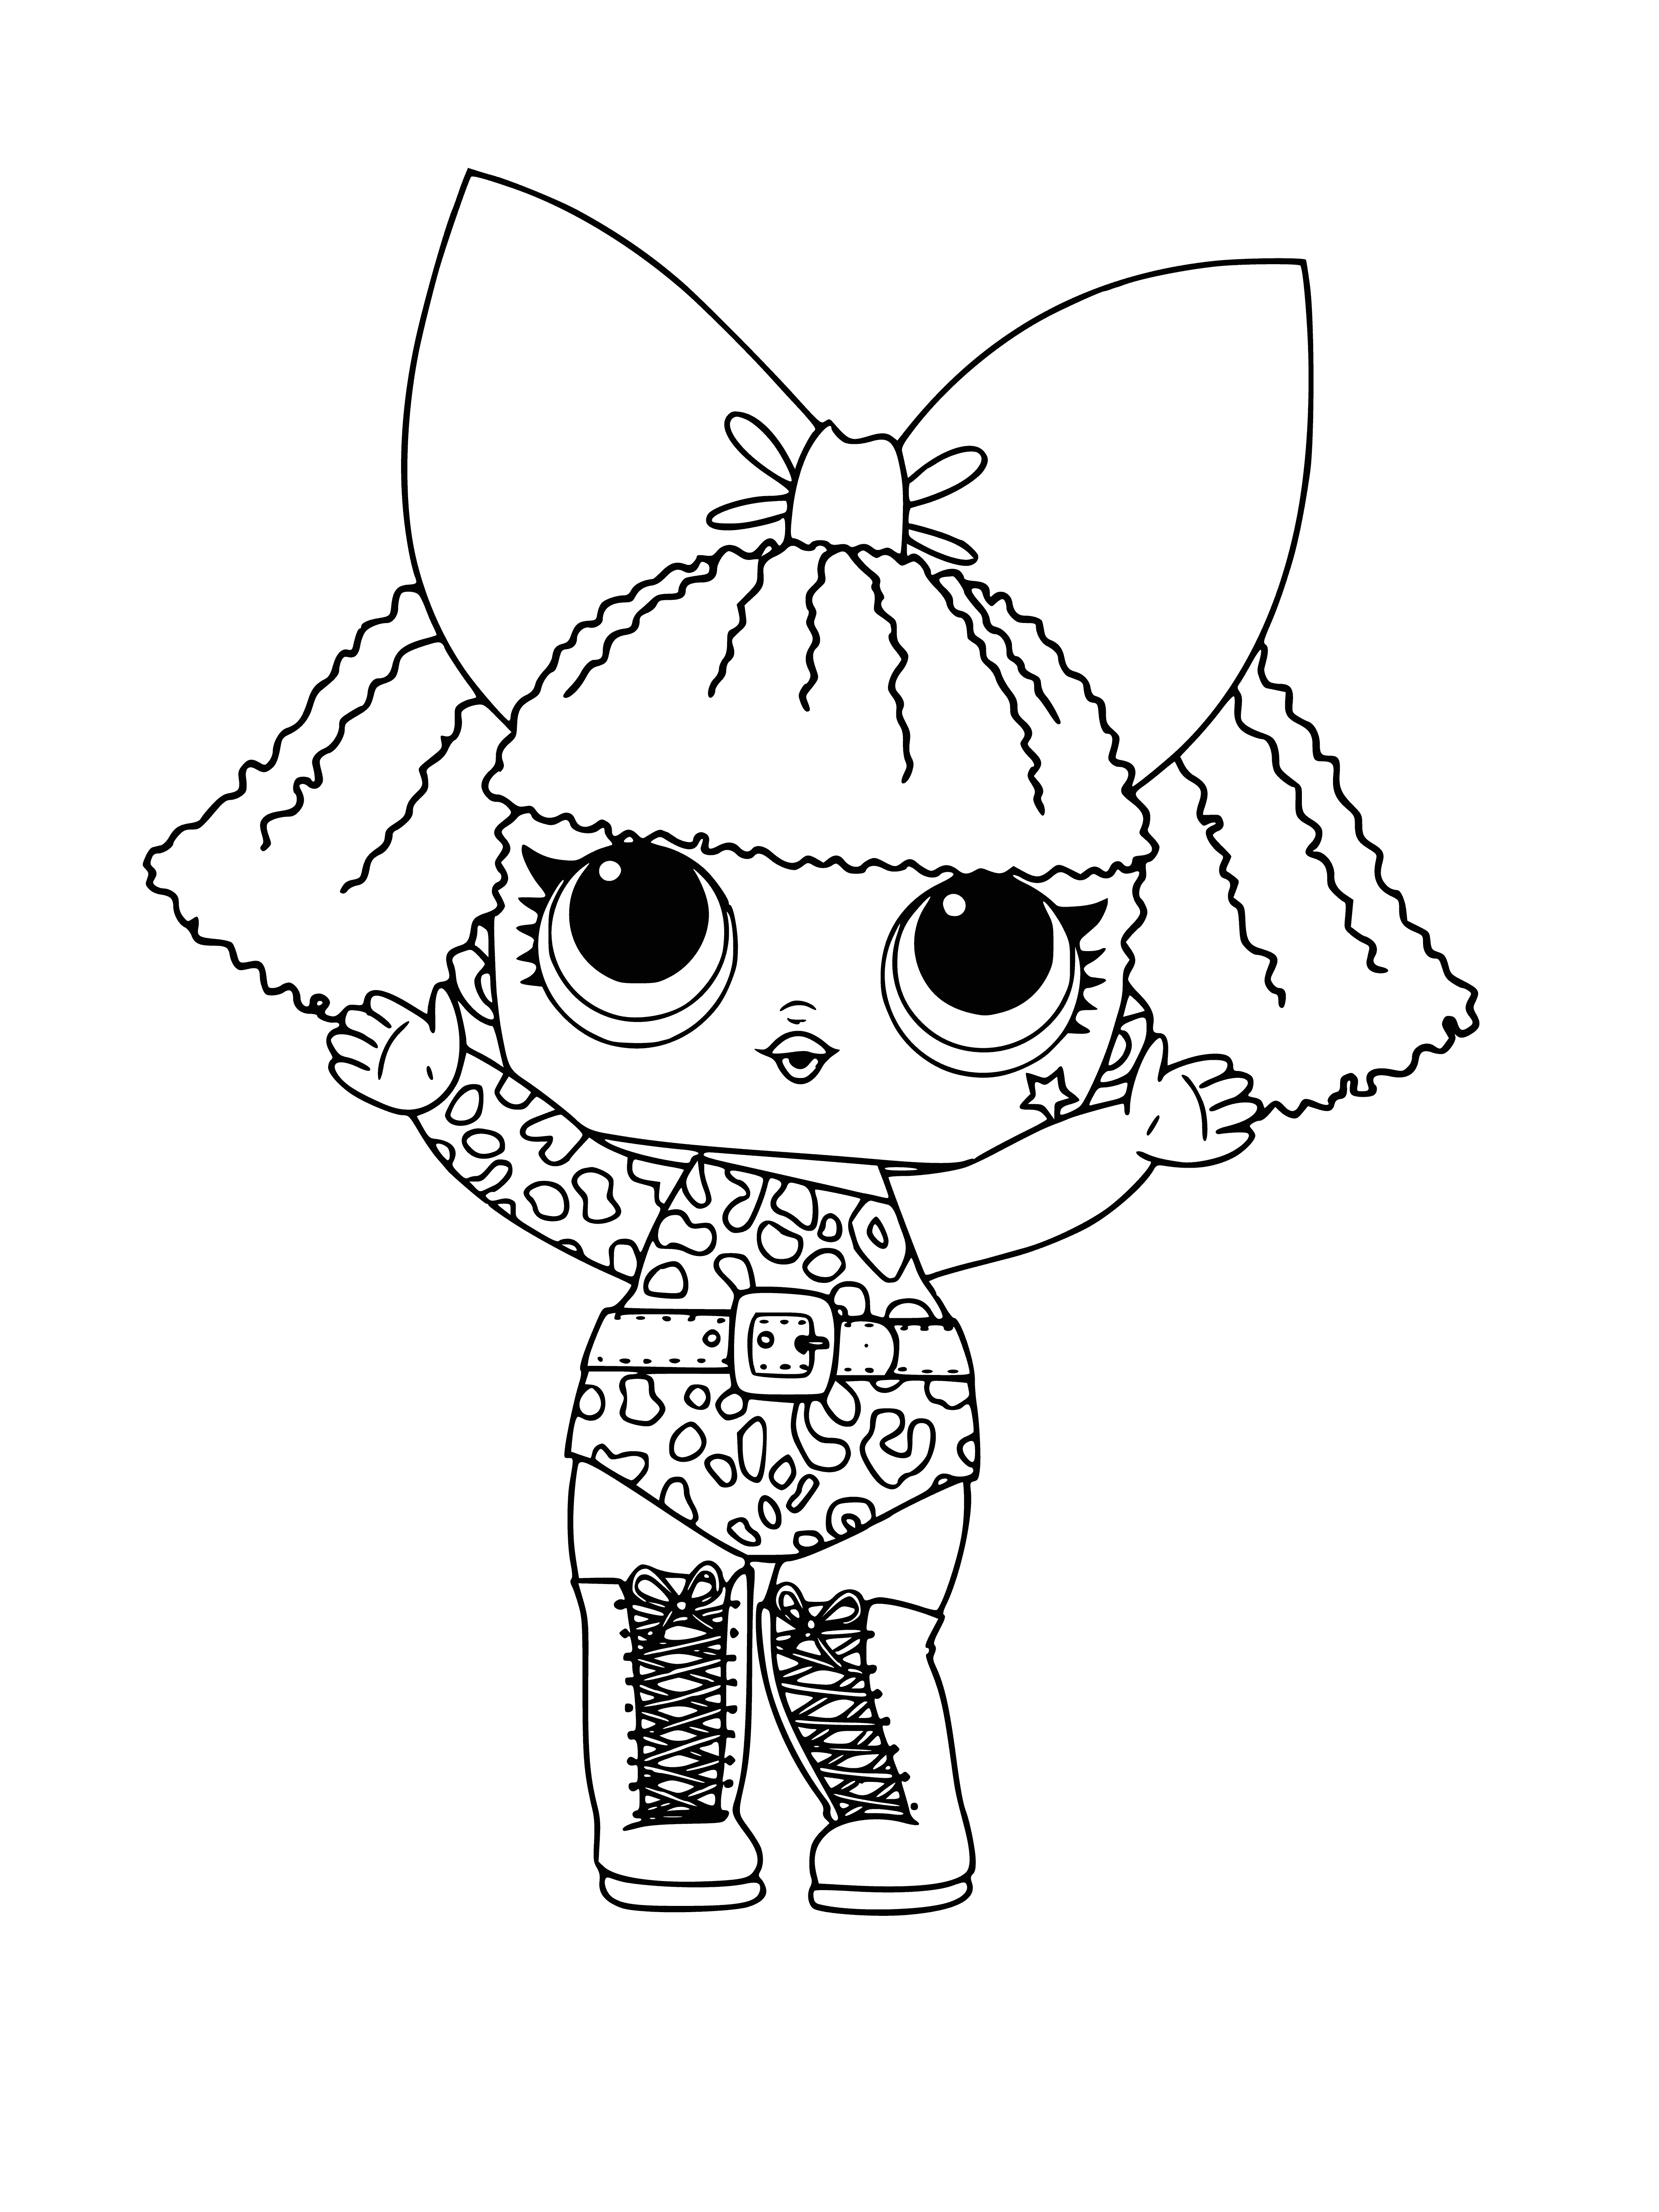 LOL Diva (Lady Diva) series 1 coloring page